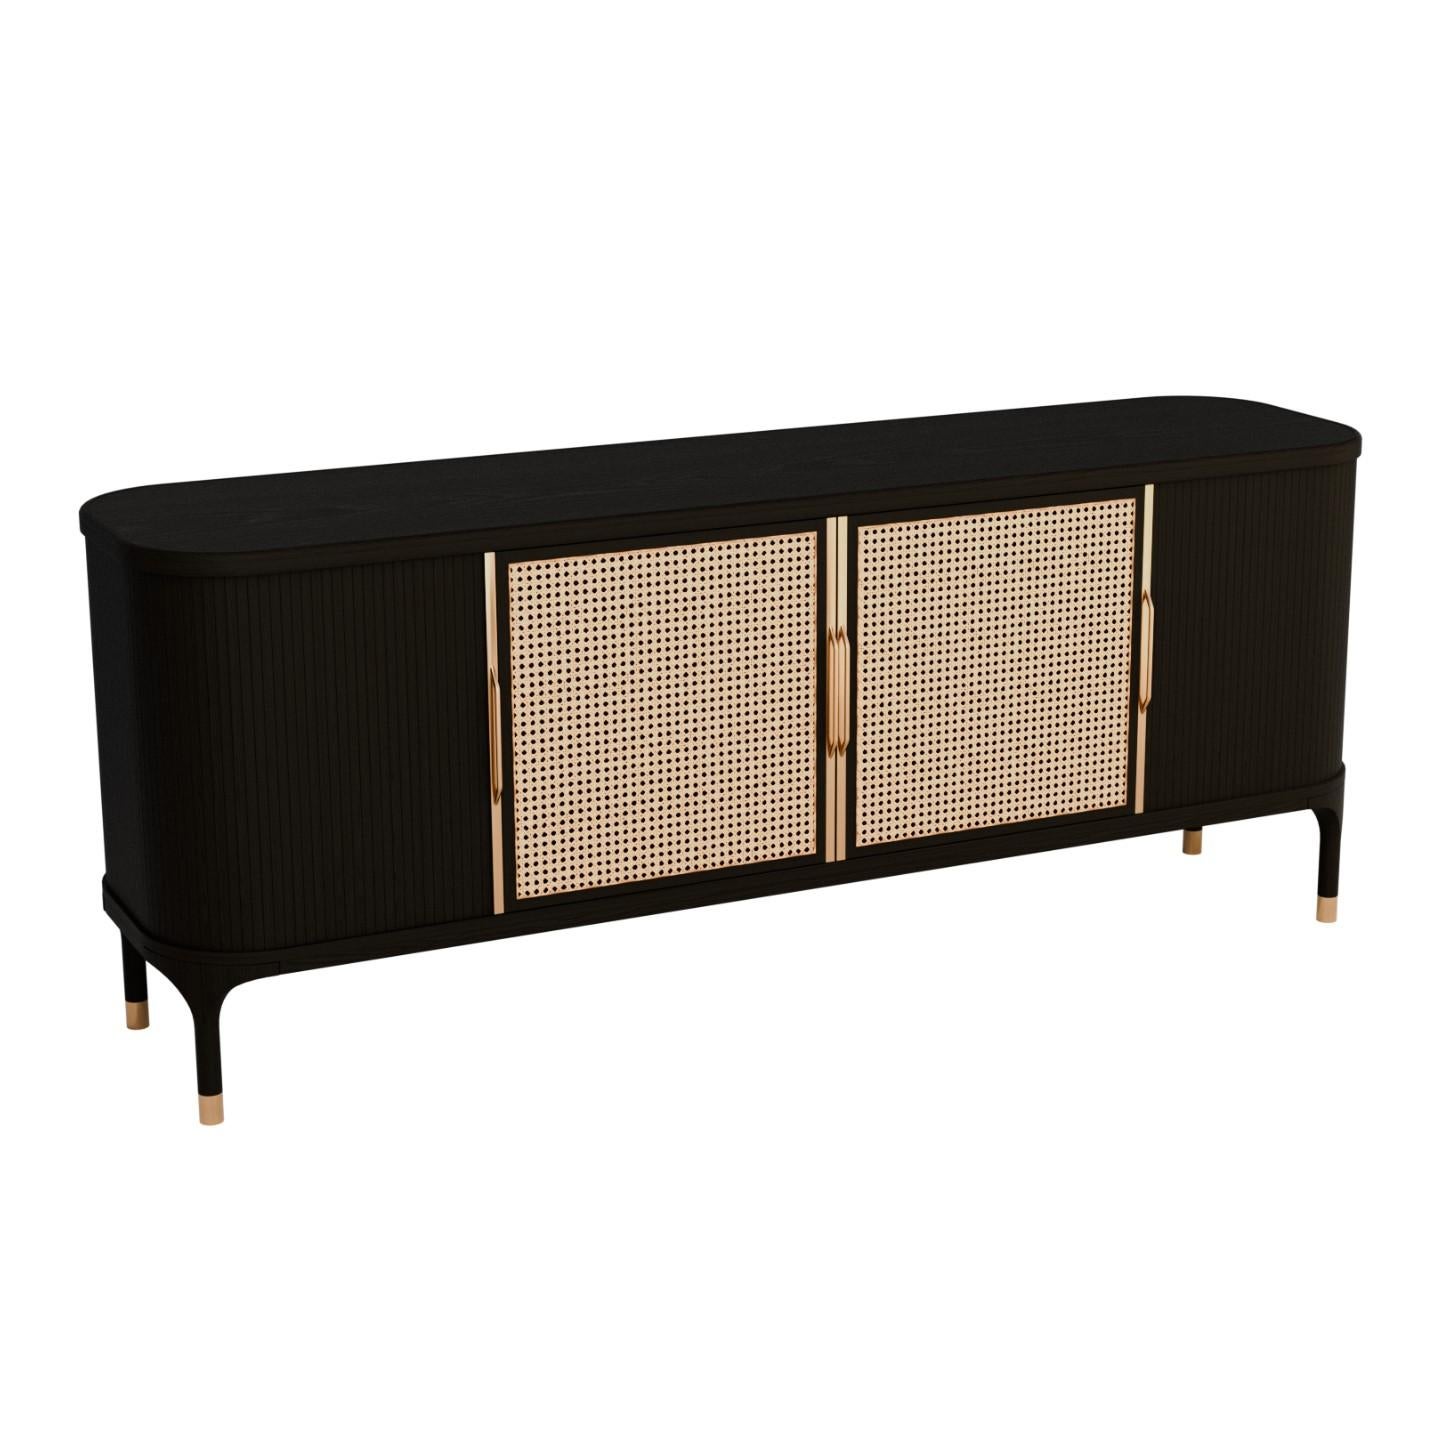 Contemporary style Joyce sideboard made of ashwood
Two central doors with Vienna straw and two side sliding doors with handmade brass handles.
The top can be made of wood, marble-ceramic or glass.
Designed by Libero Rutilo.
Made in Italy by